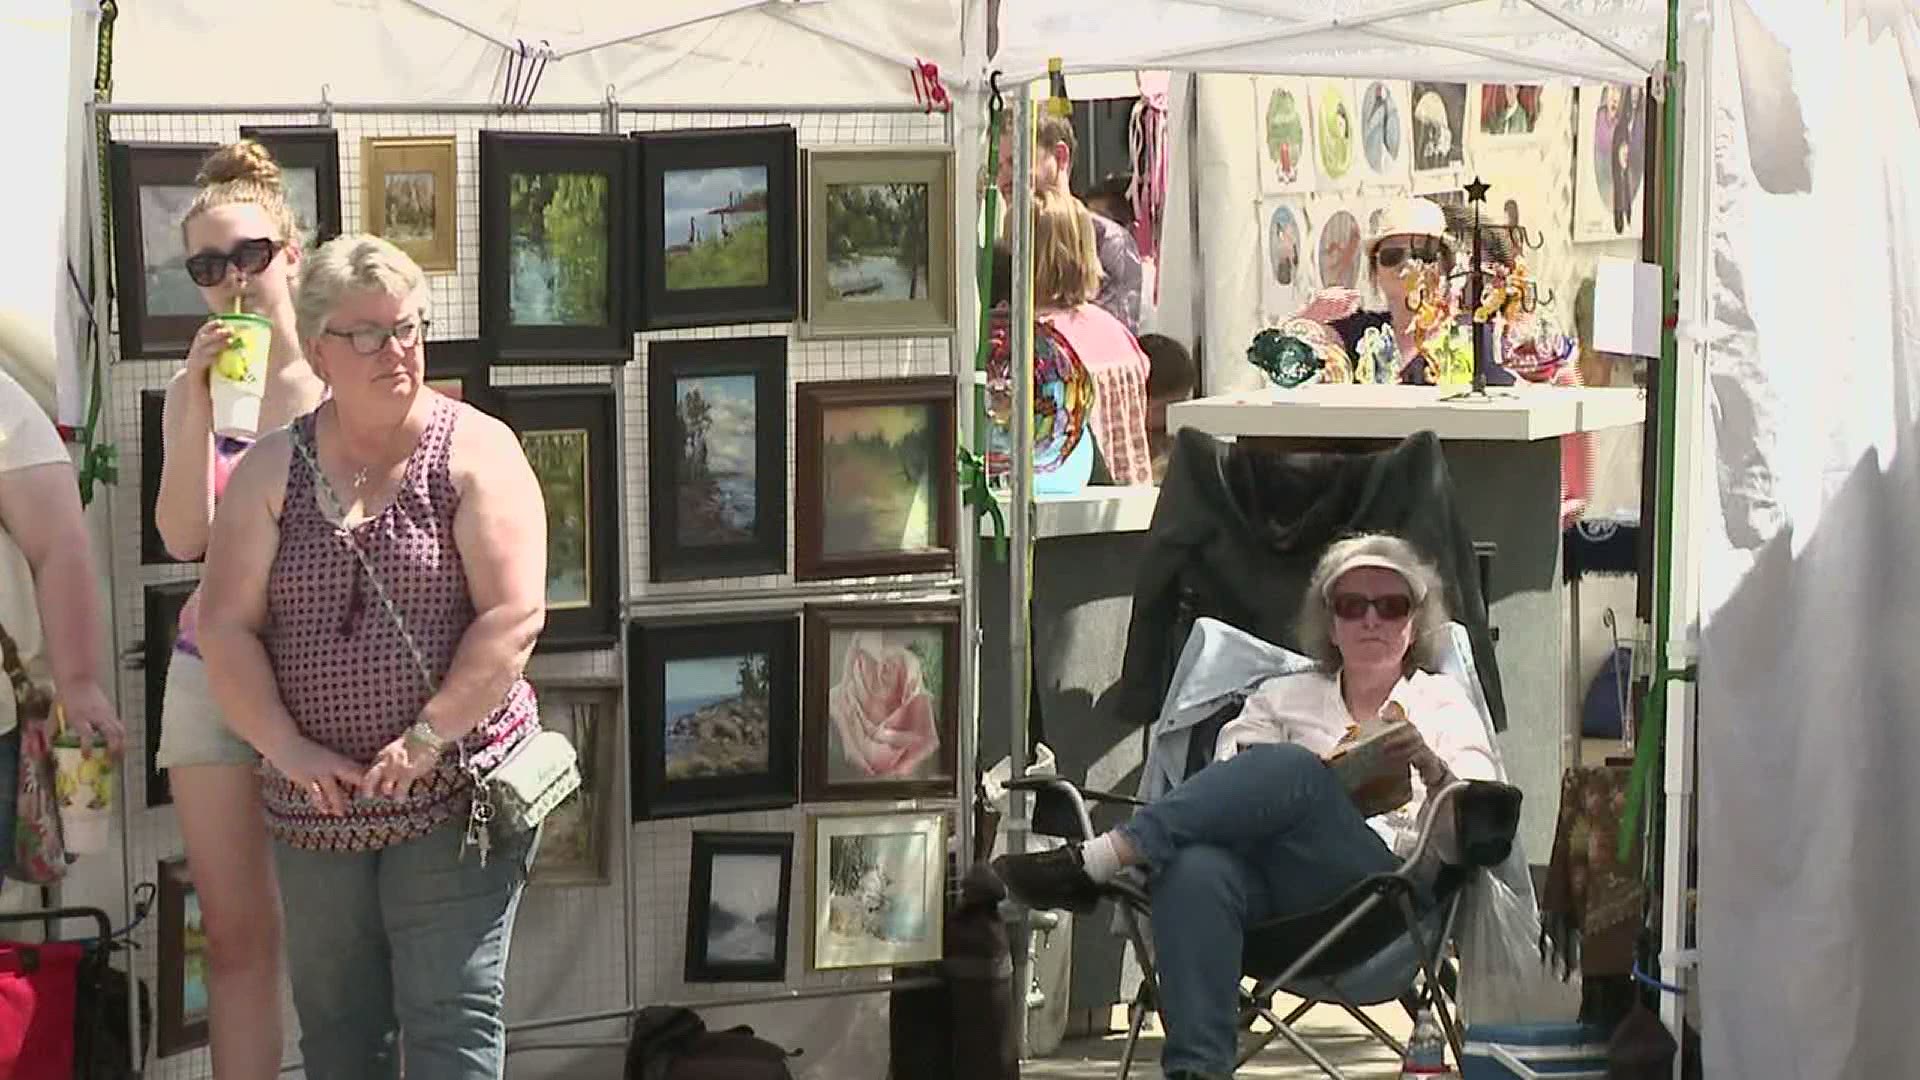 The Spring Beaux Arts Fair will be held at the Mississippi Valley Fairgrounds May 8-9 in Davenport.